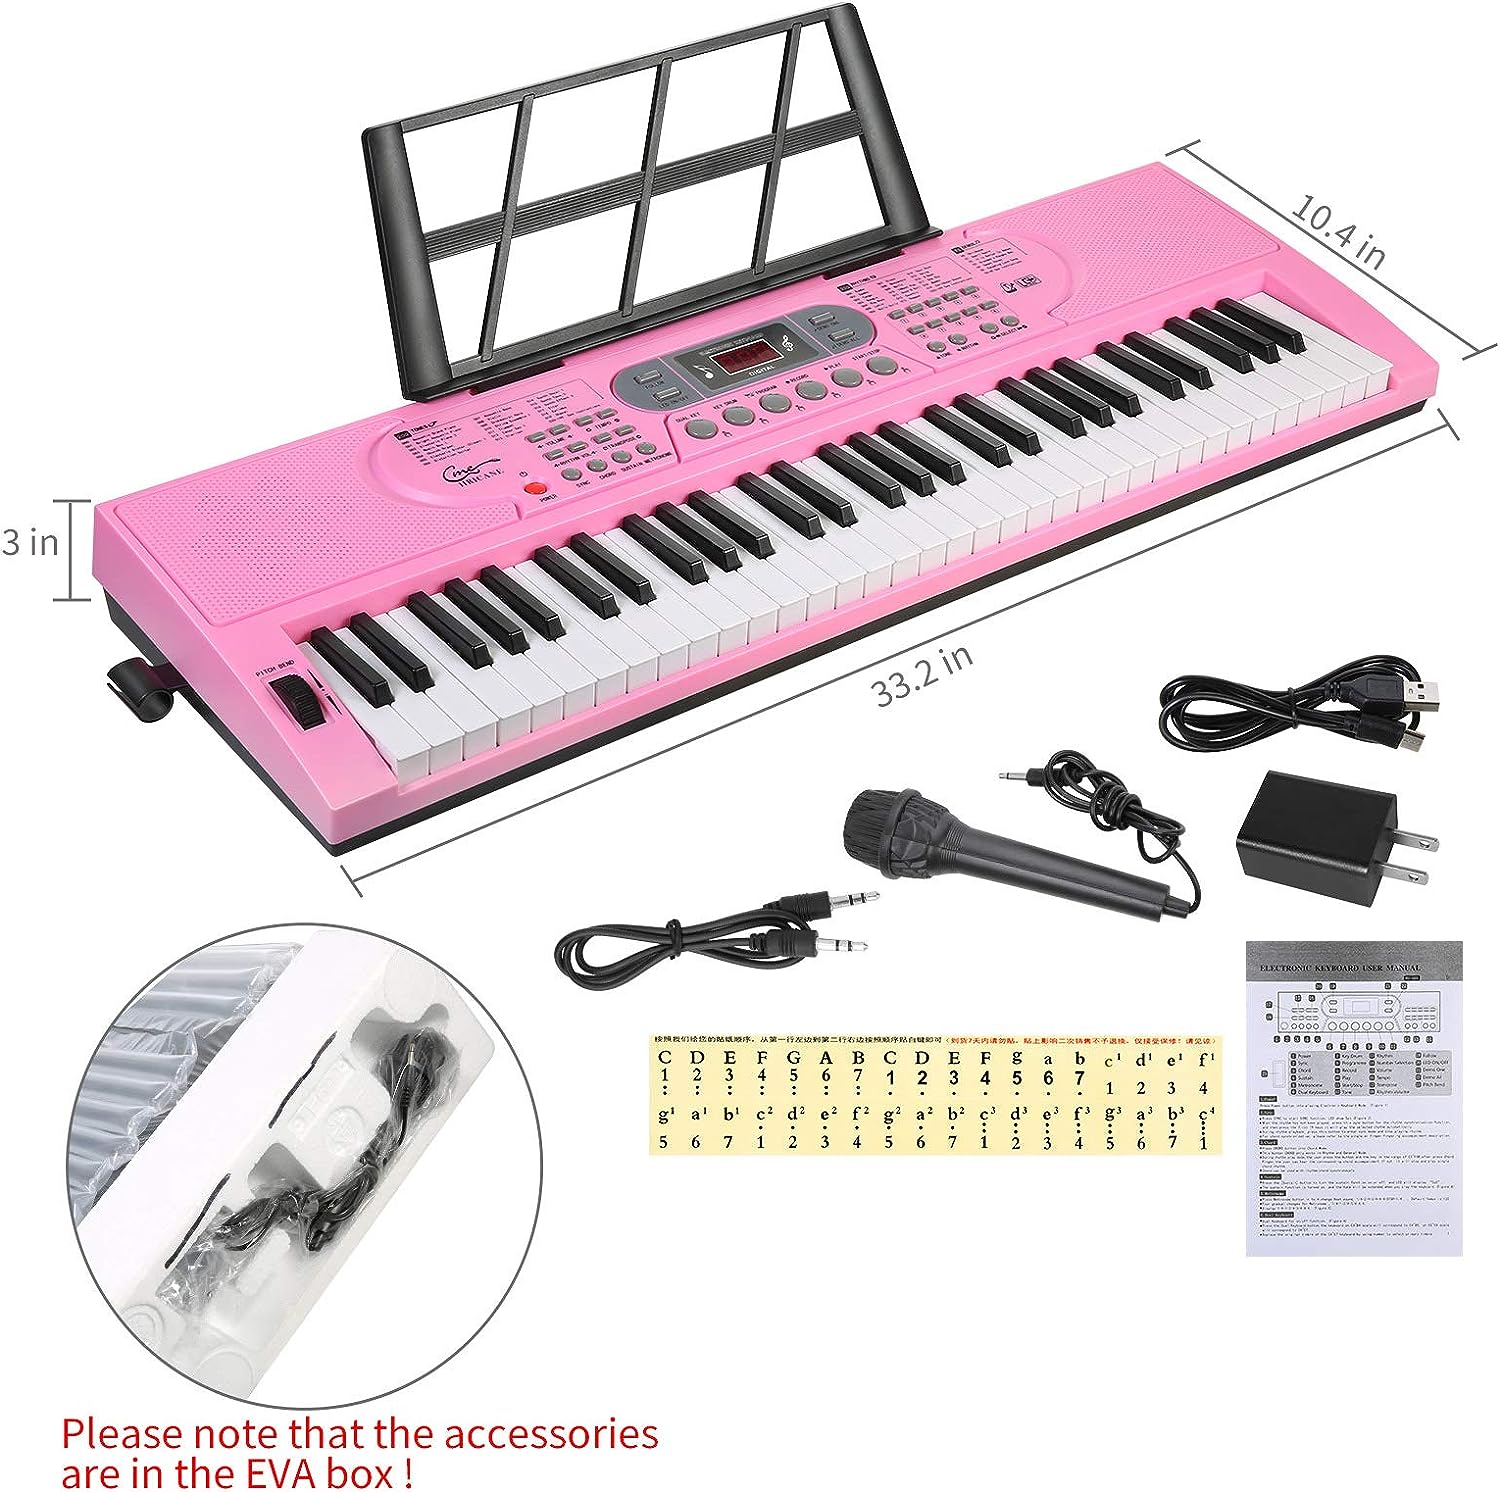 Hricane Keyboard Piano Lighted Keys for Beginner Adults Teens Kids, 61 Key Electronic Music Keyboard with Teaching Modes Powered by USB or Battery with LCD Display Microphone Headphone Jack